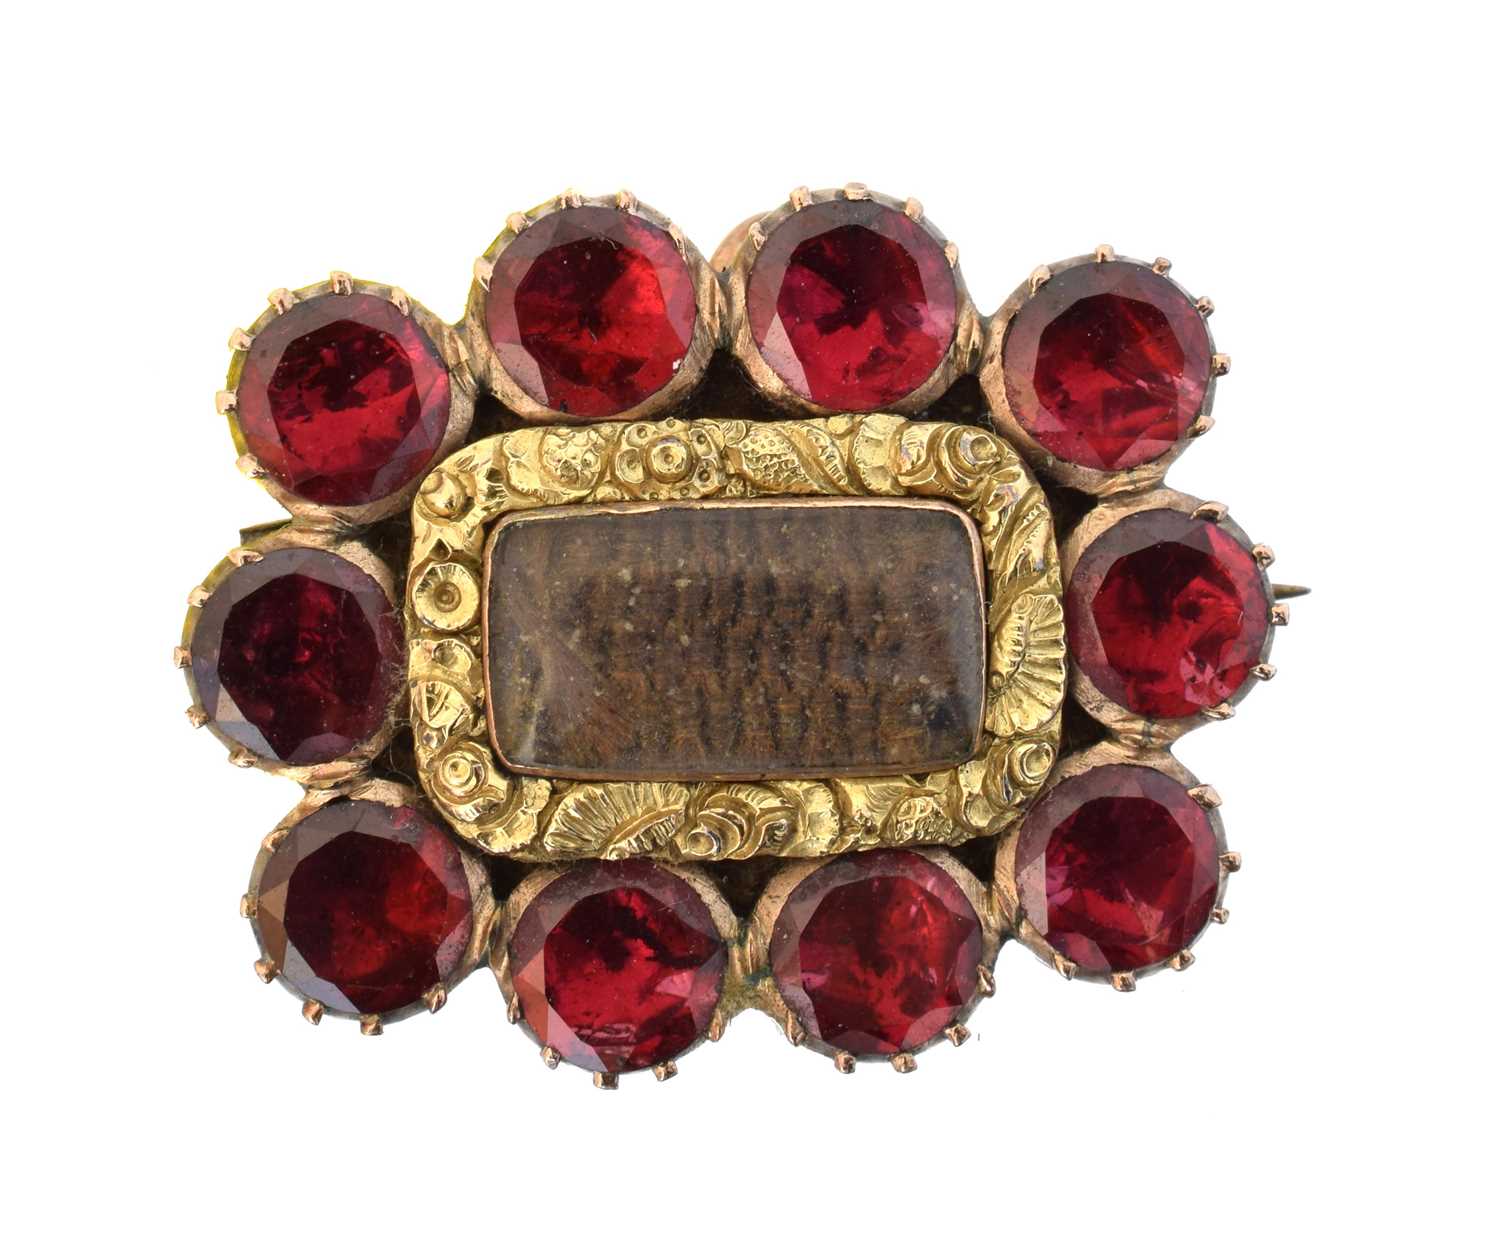 Lot 9 - An early 19th century garnet mourning brooch